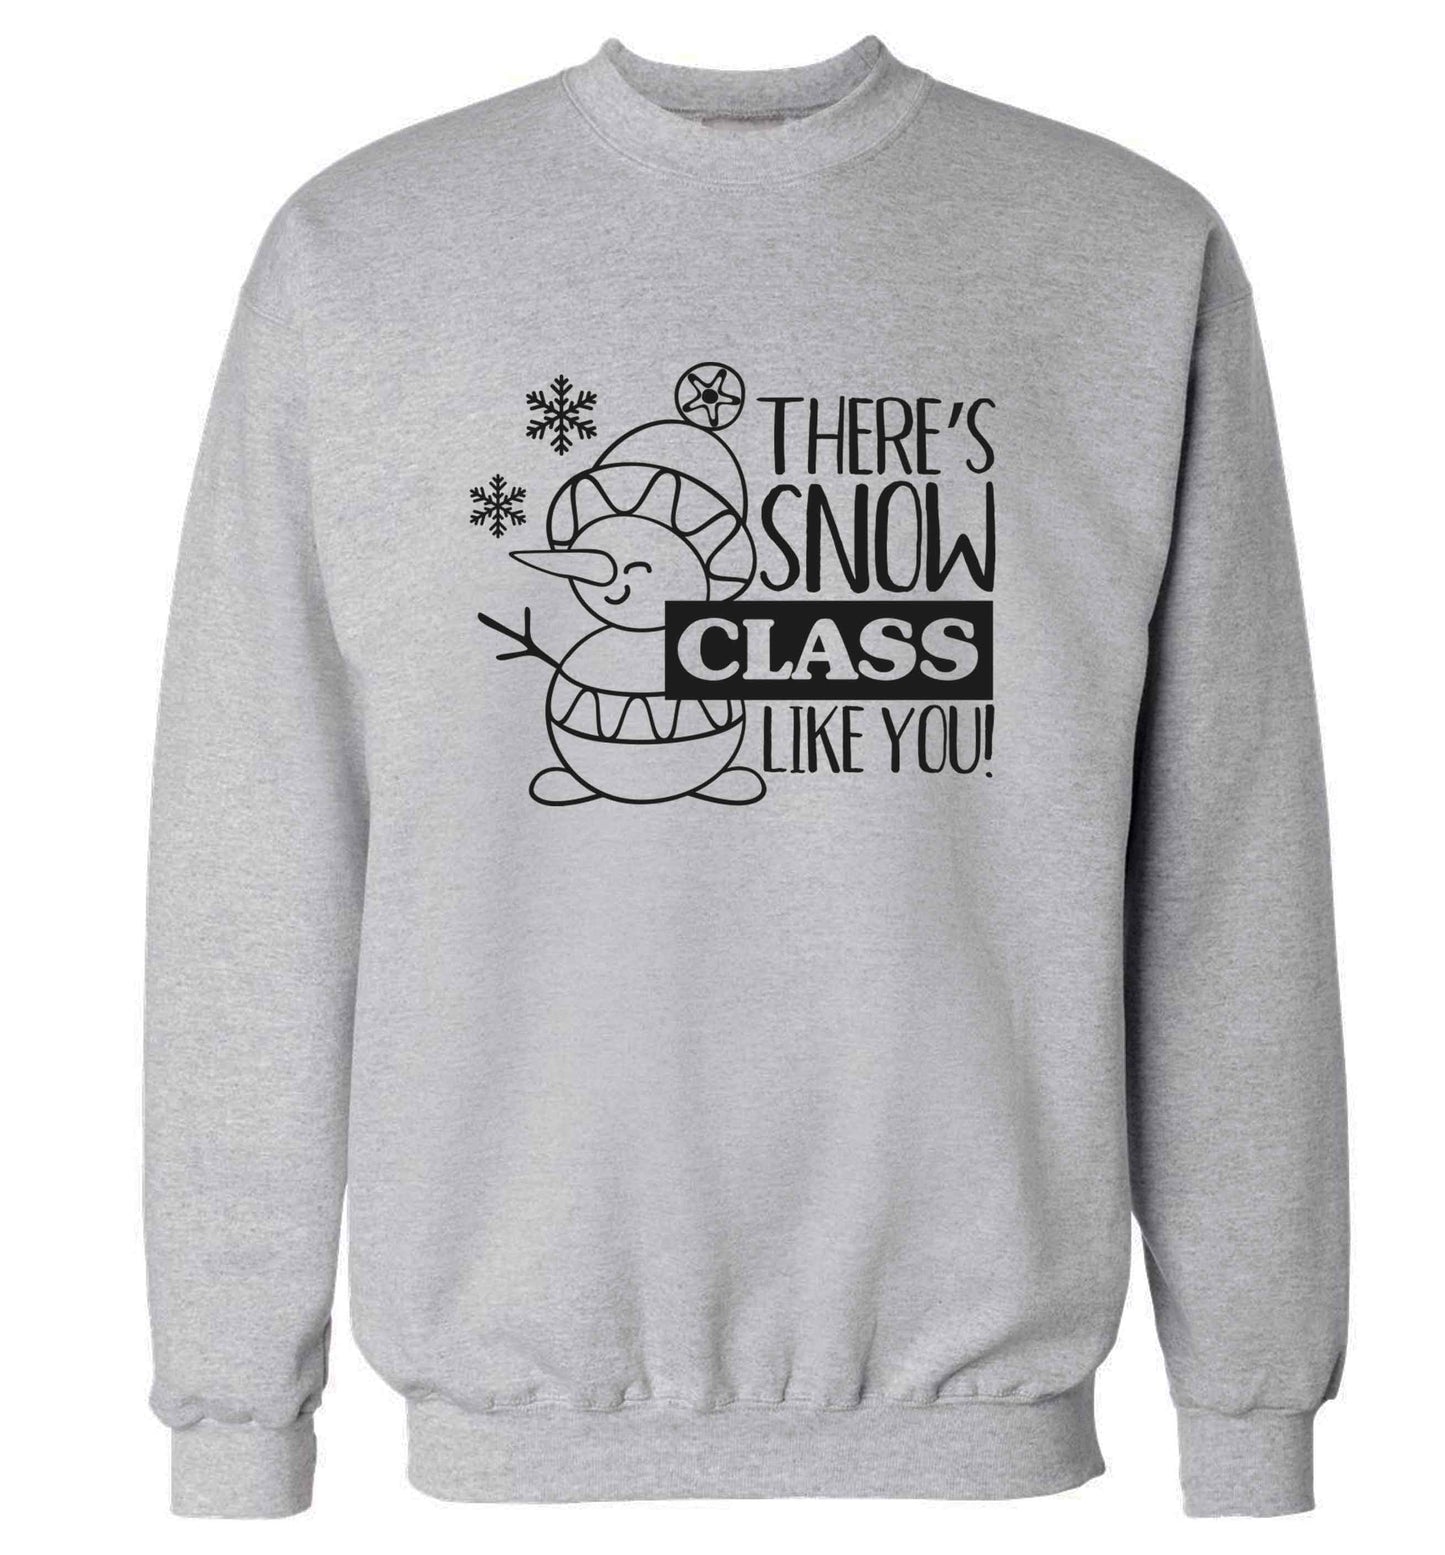 There's snow class like you adult's unisex grey sweater 2XL